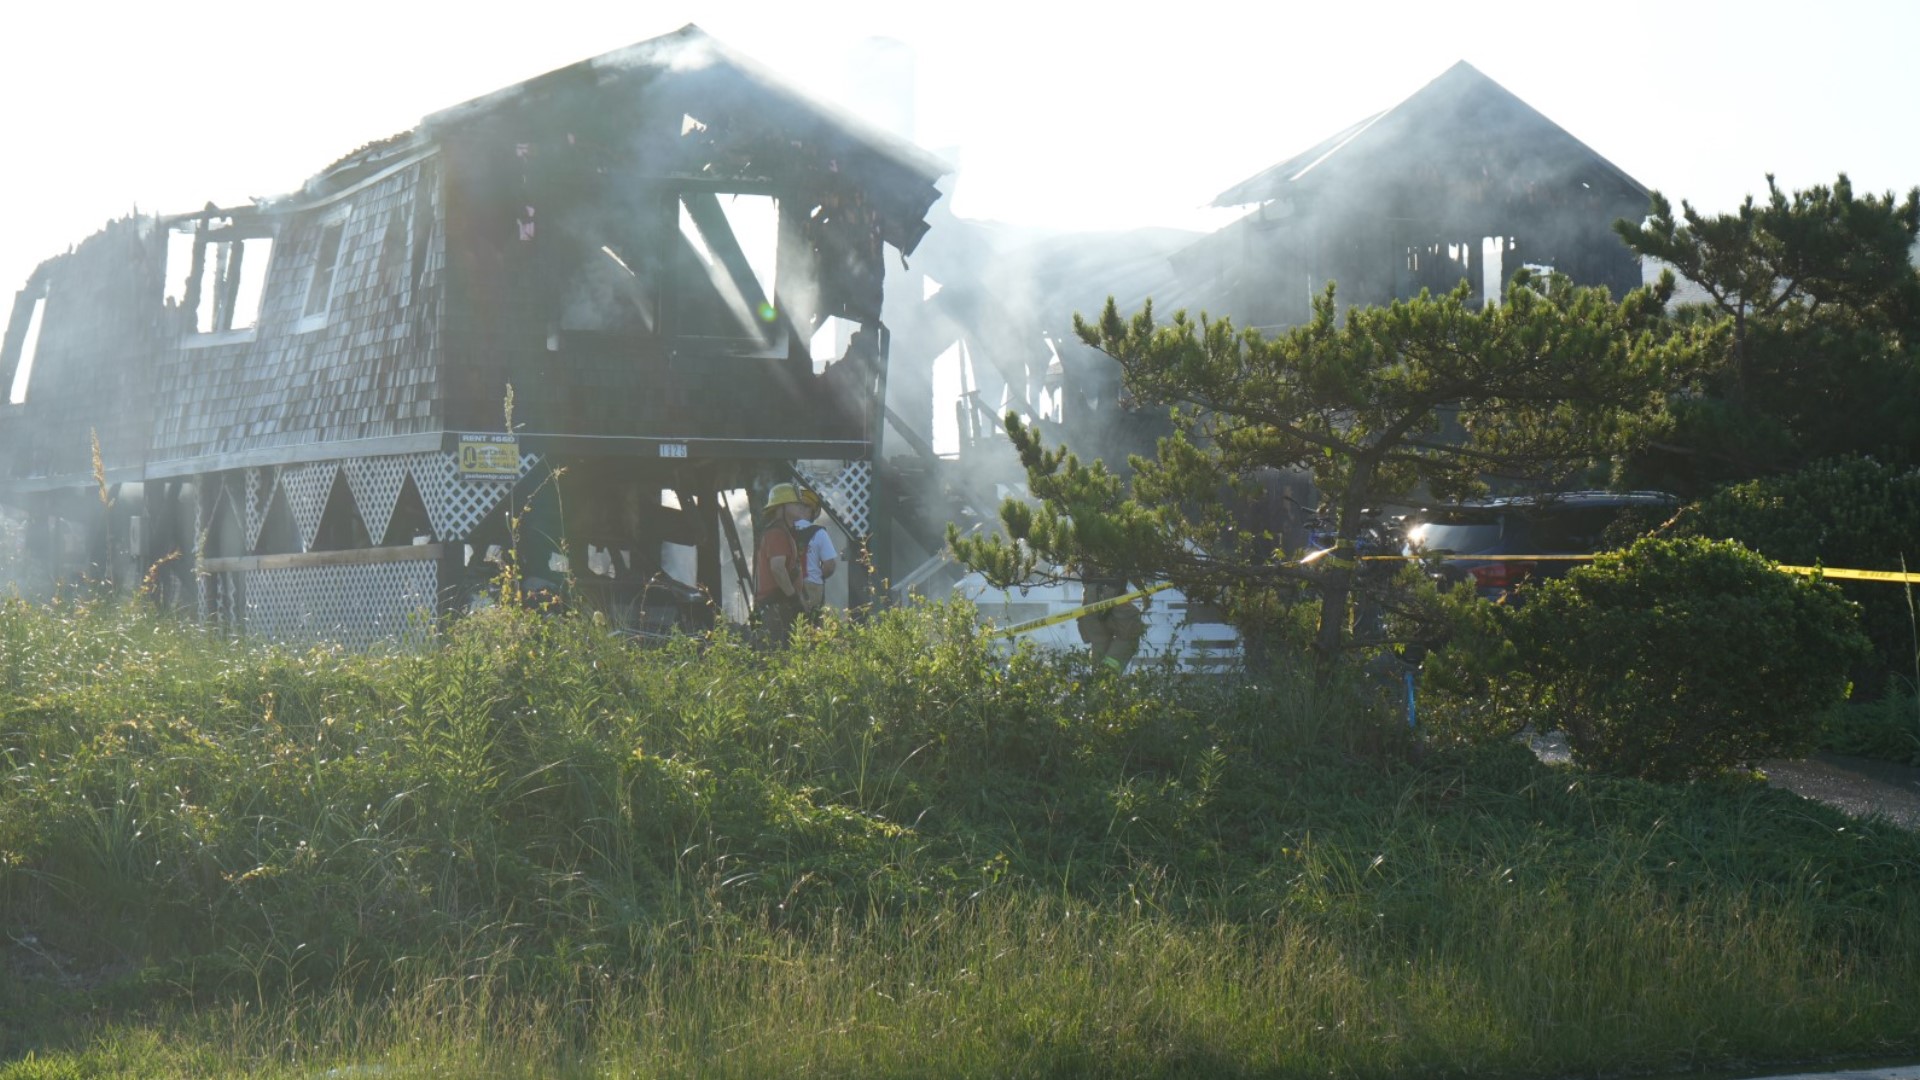 Husband and wife among casualties in Kill Devil Hills house fire ...